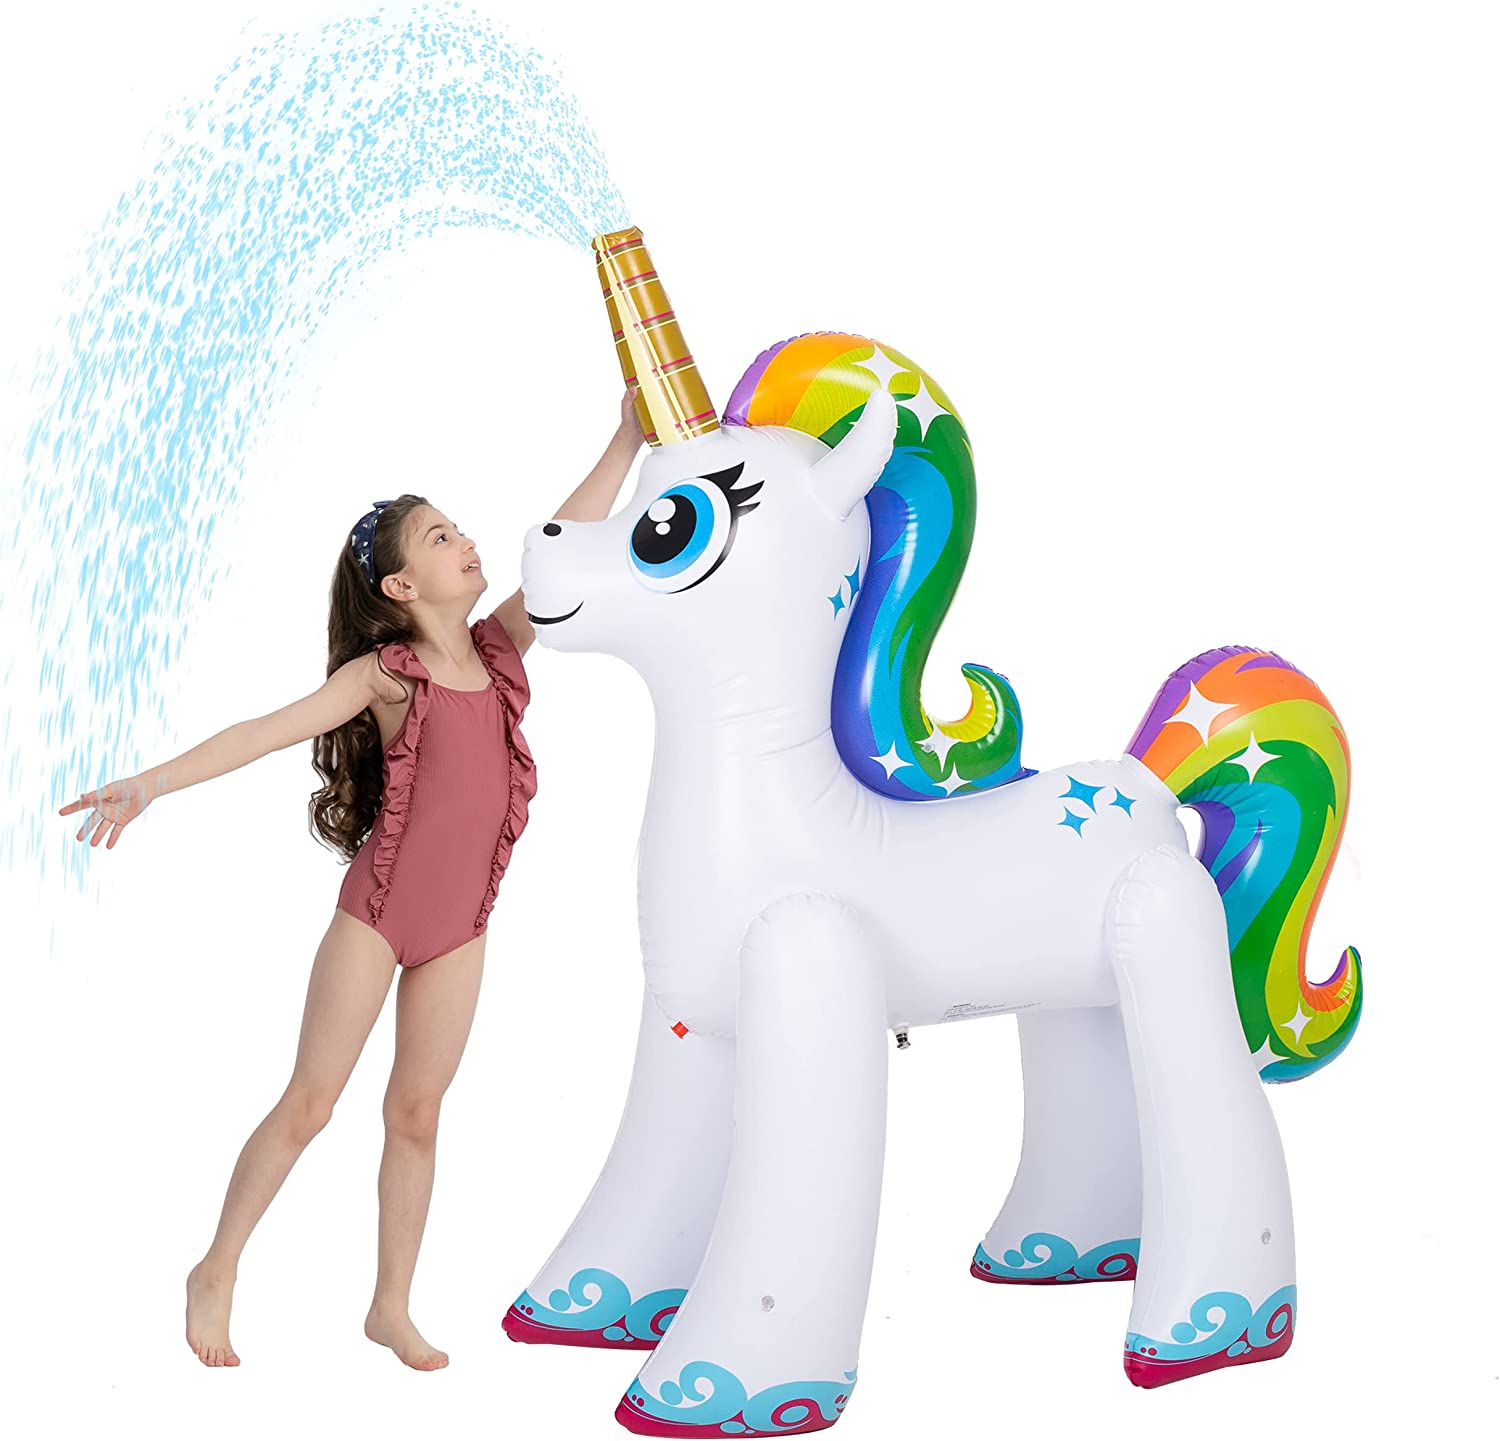 48'' Inflatable Unicorn Yard Sprinkler, Inflatable Water Toy, Summer Outdoor Fun, Lawn Sprinkler Toy for Kids